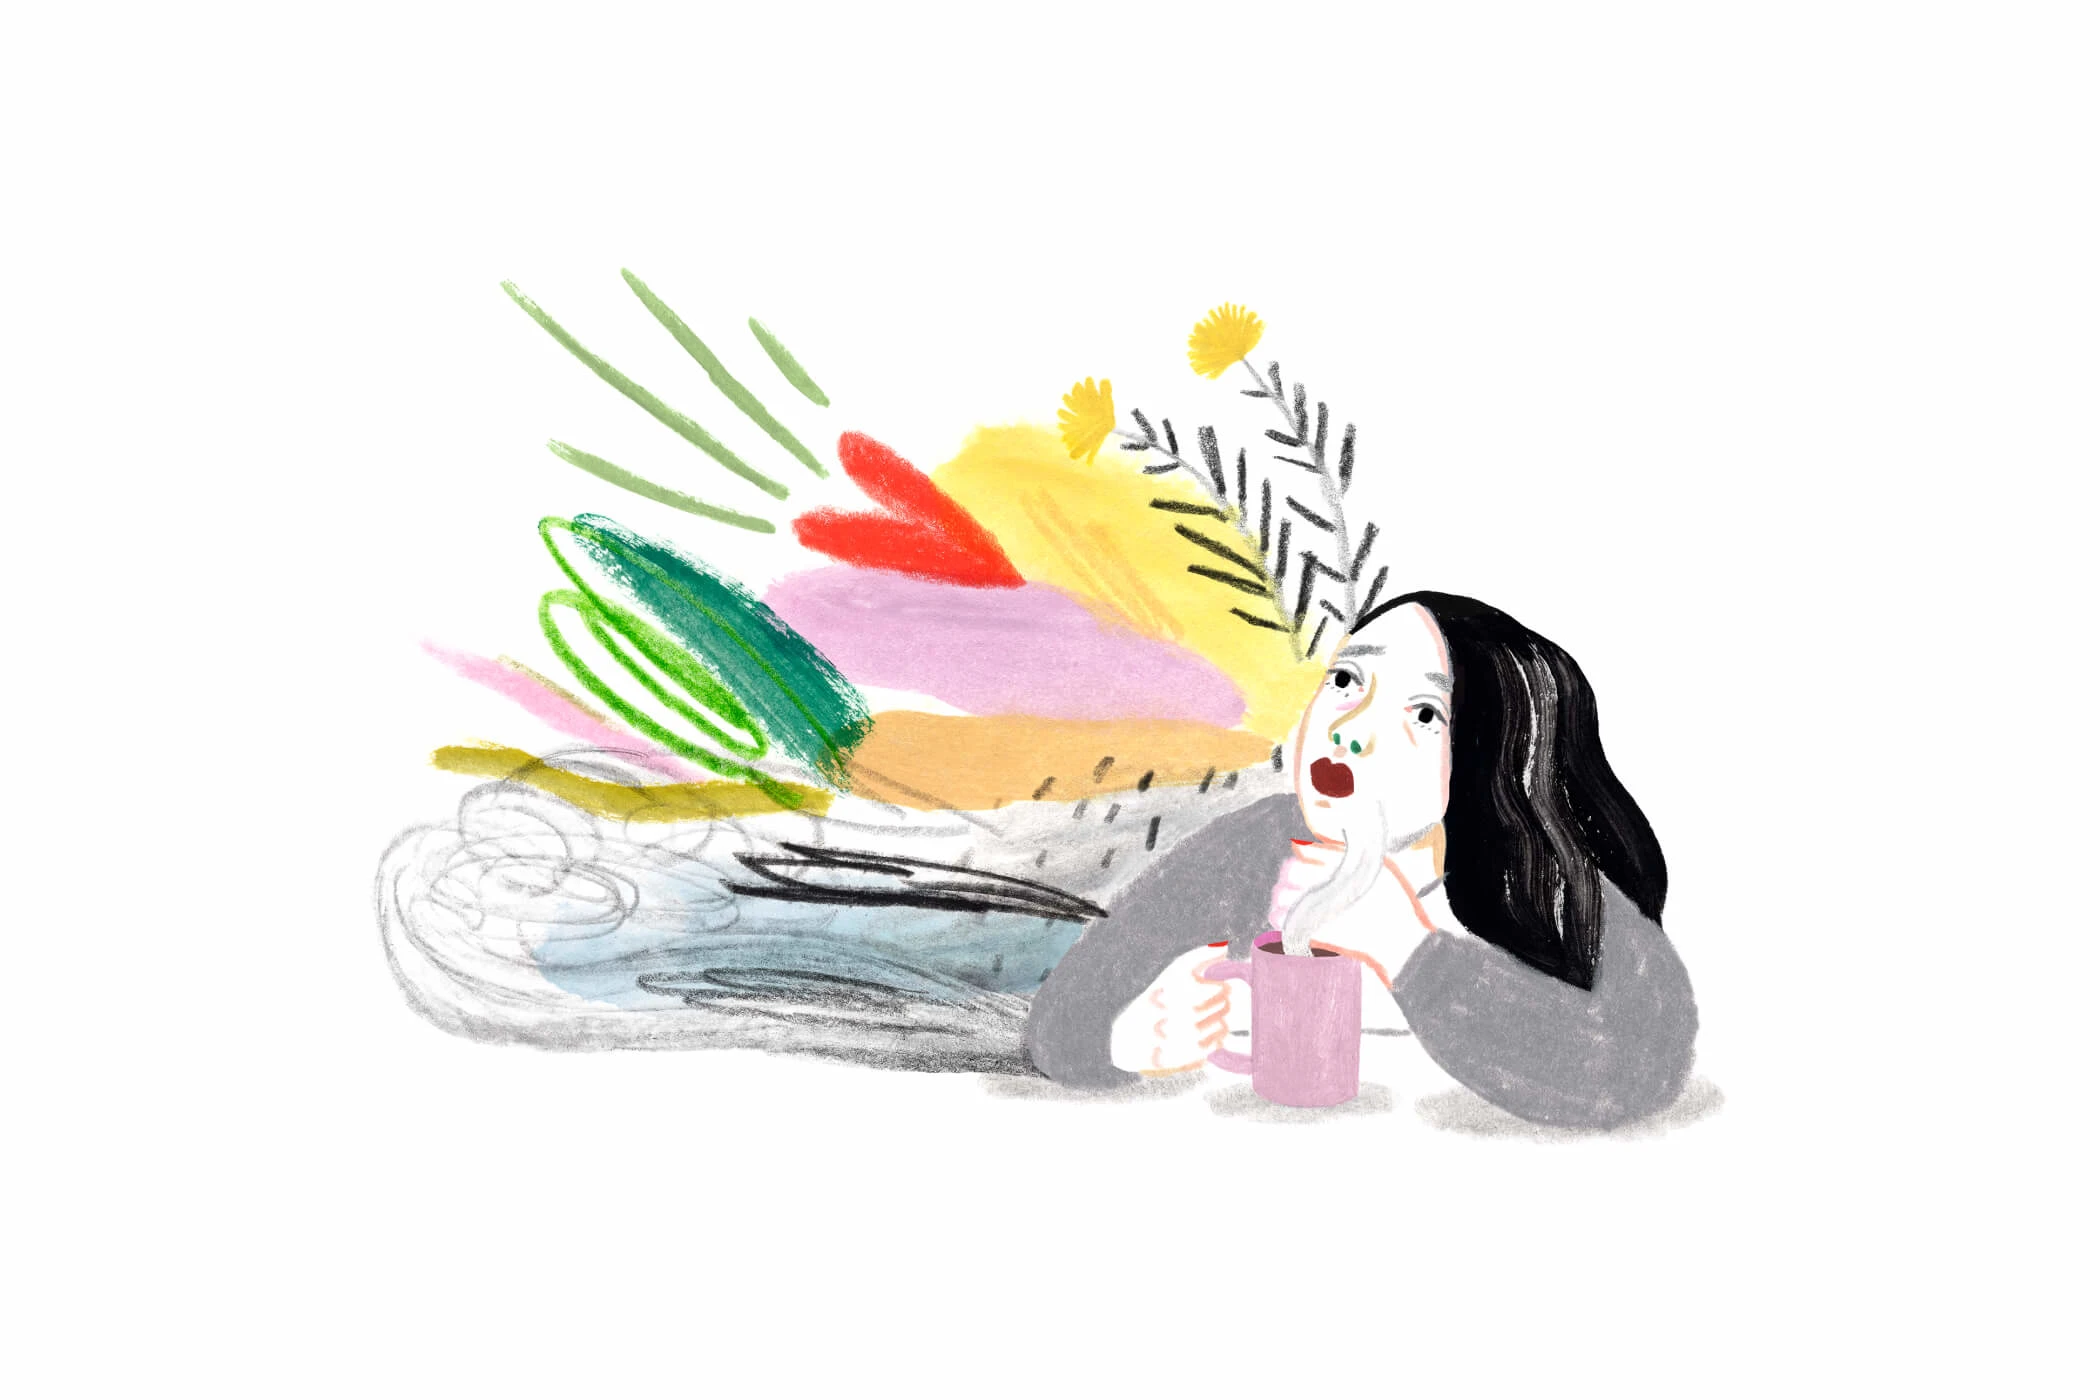 A Monarch by SimplePractice illustration of a woman with black hair in a gray top holding a pink mug looking up at colorful lines and doodles.